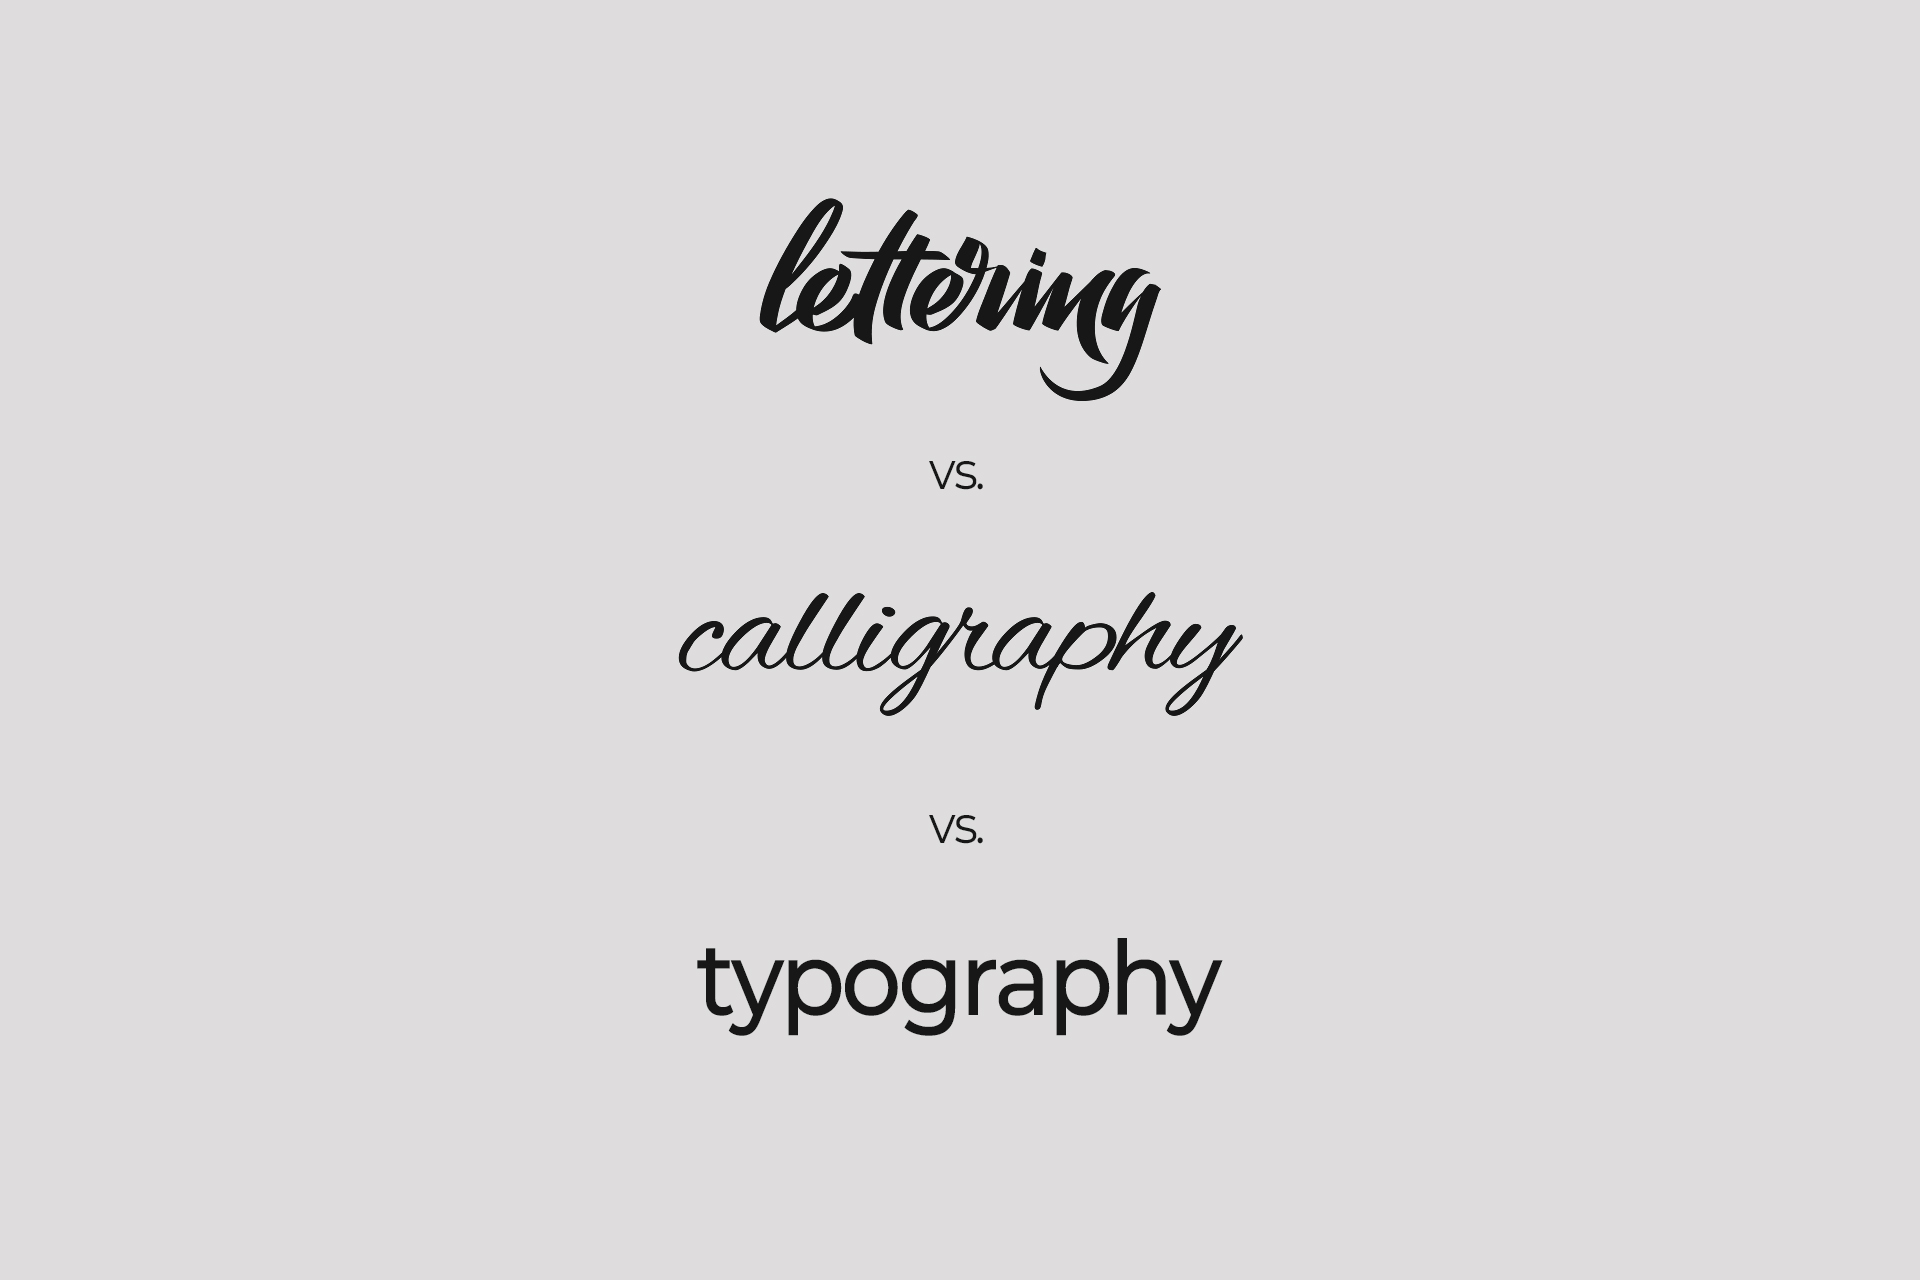 Lettering, calligraphy and typography